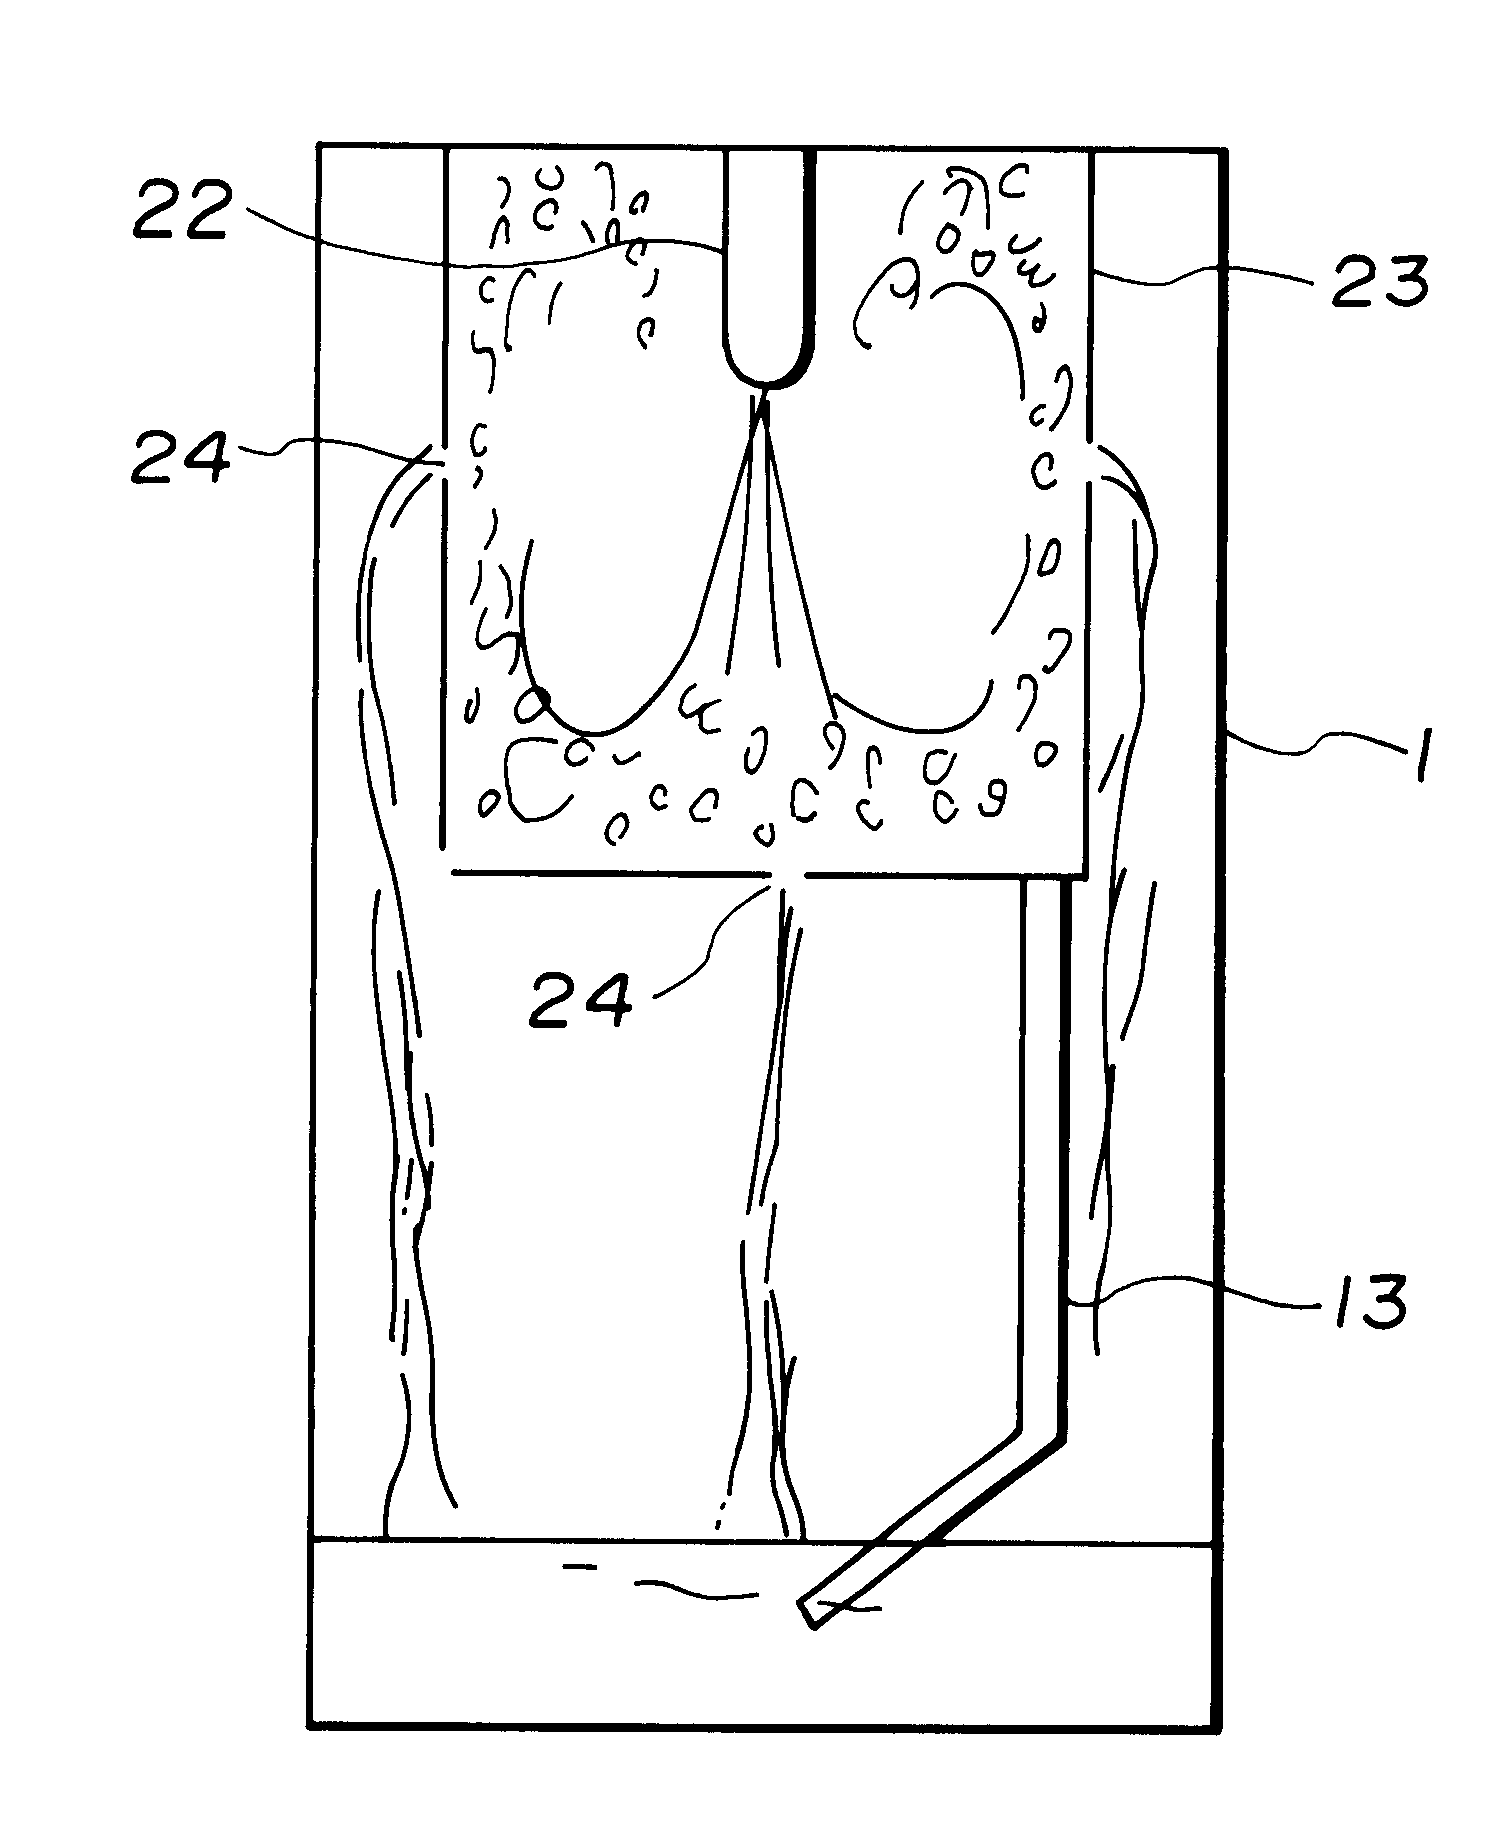 Apparatus for manufacturing carbonated water